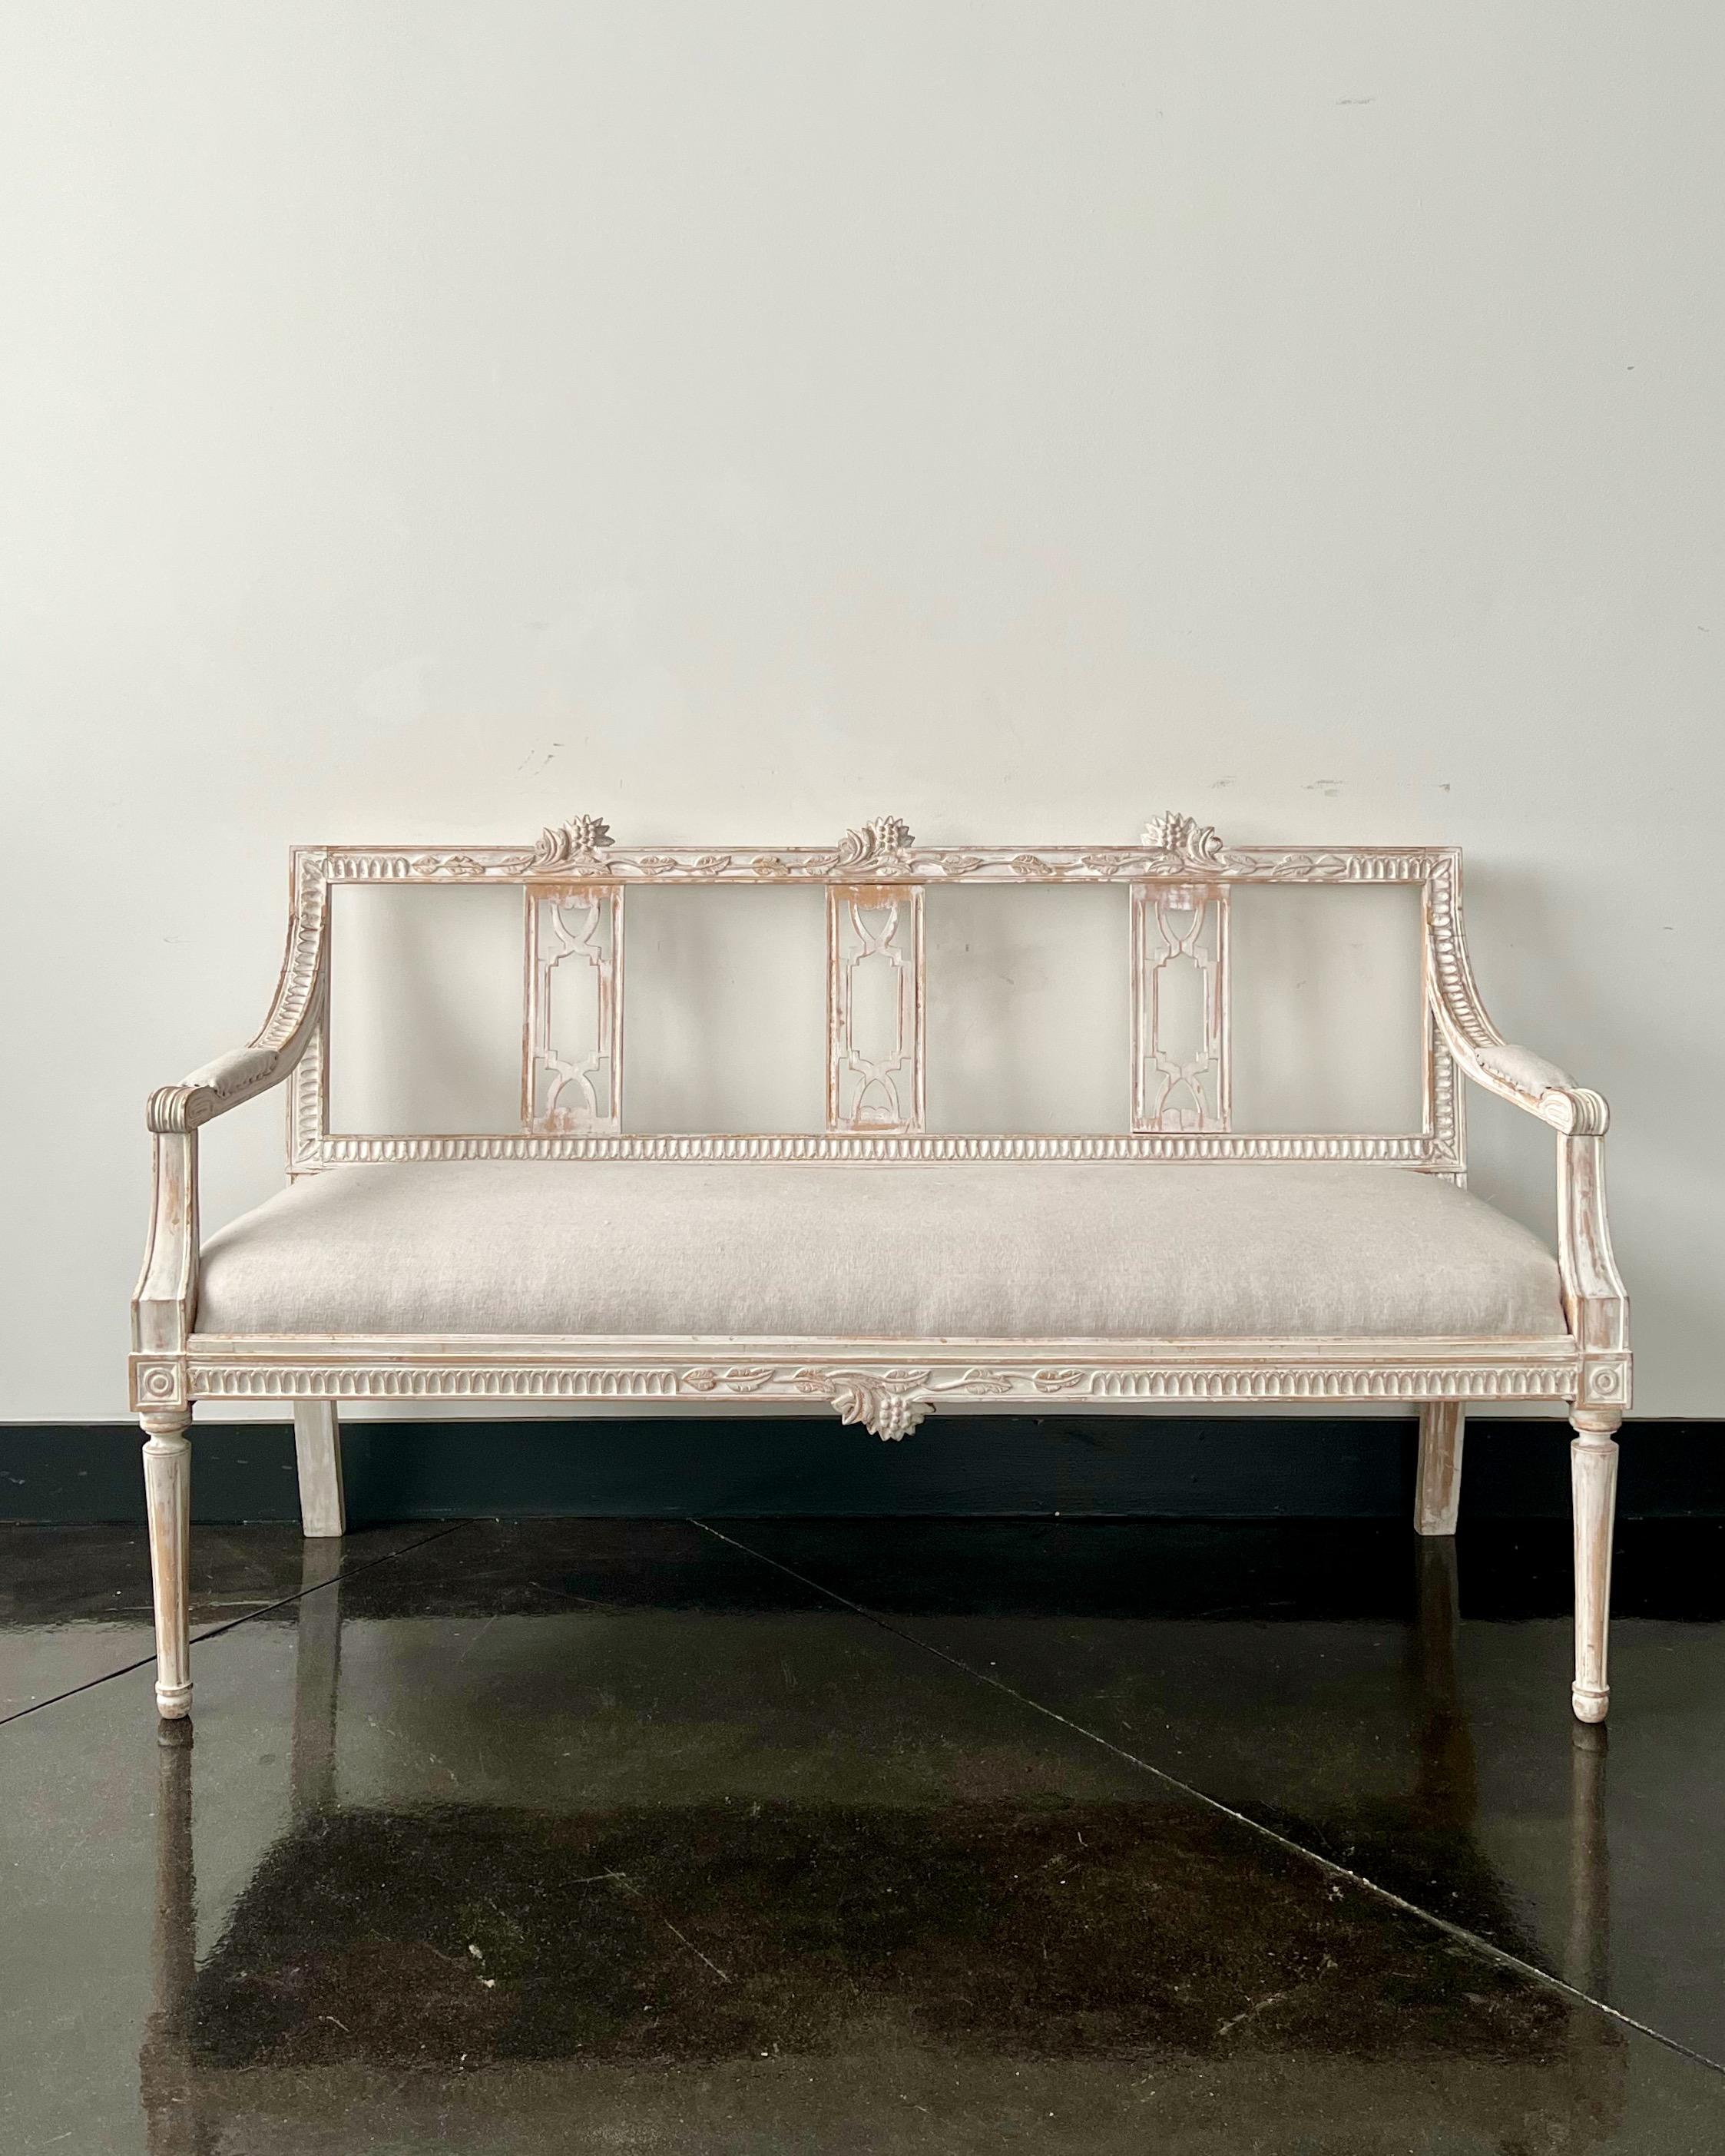 Painted Gustavian period sofa, having the signature fruit and flower carving of the hops plant used by Lindome furniture makers. Hand scraped to the most original color and seat upholstered in pales of pale grey linen. Measures: Seat height